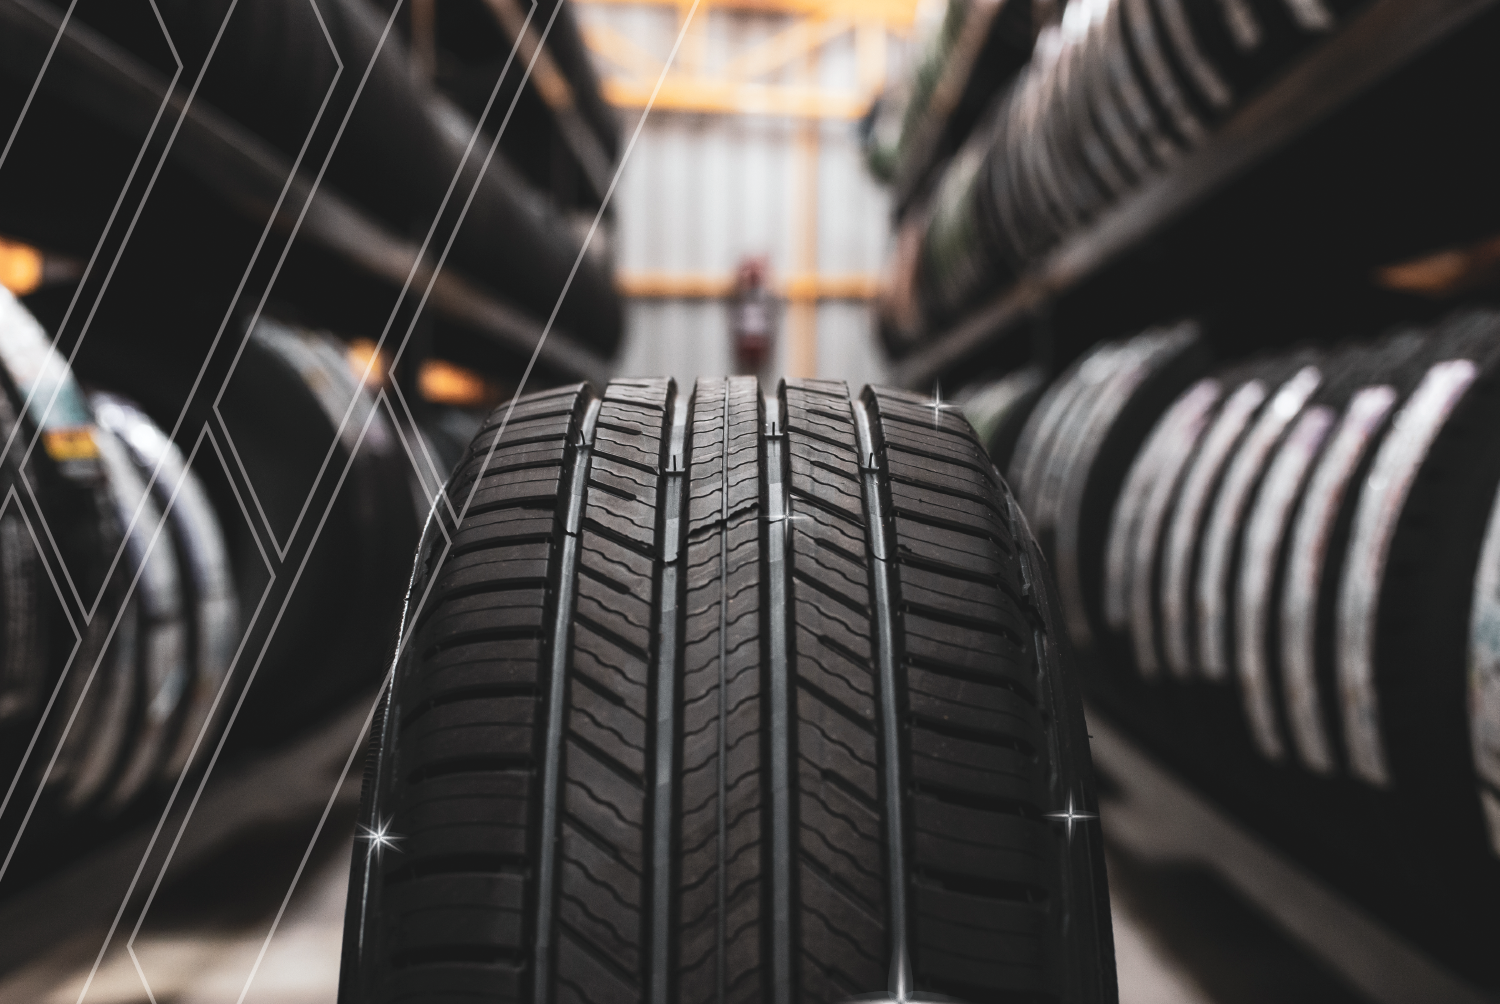 How should you take care of your vehicle tyres? We will guide you.